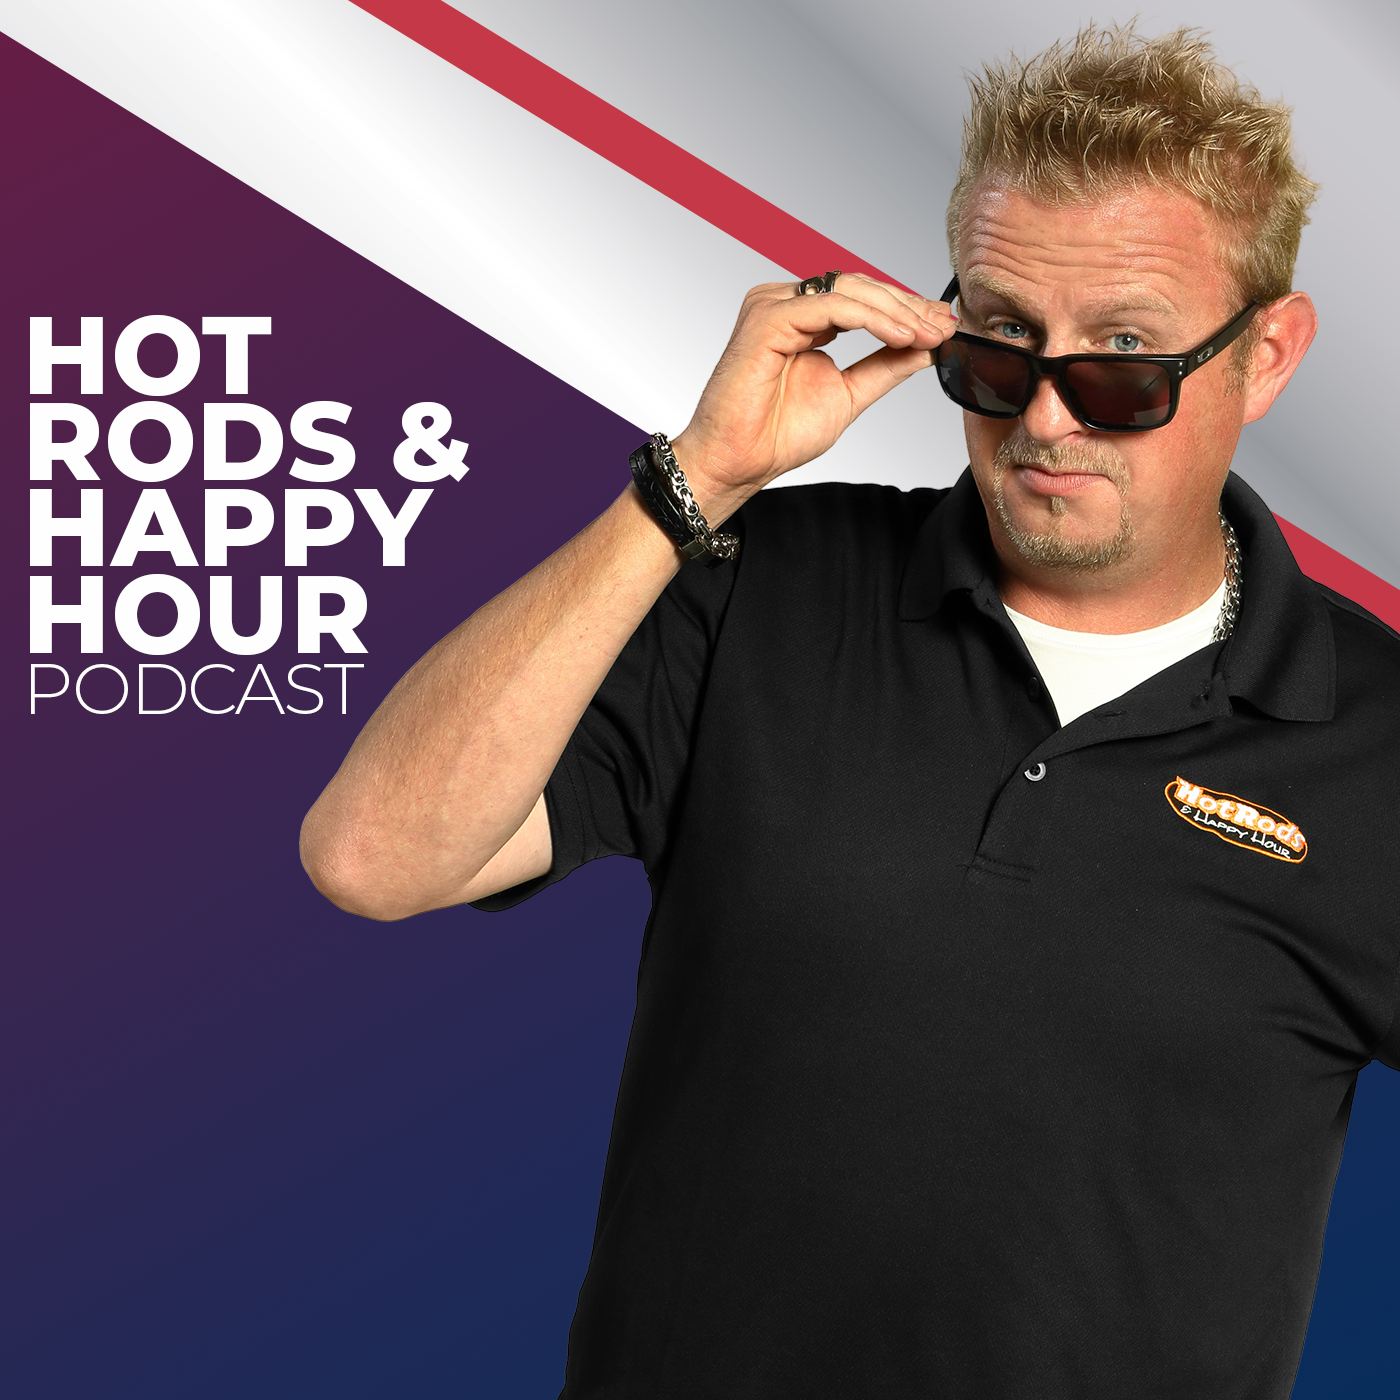 HOT RODS 2 16 20 HOUR 1 